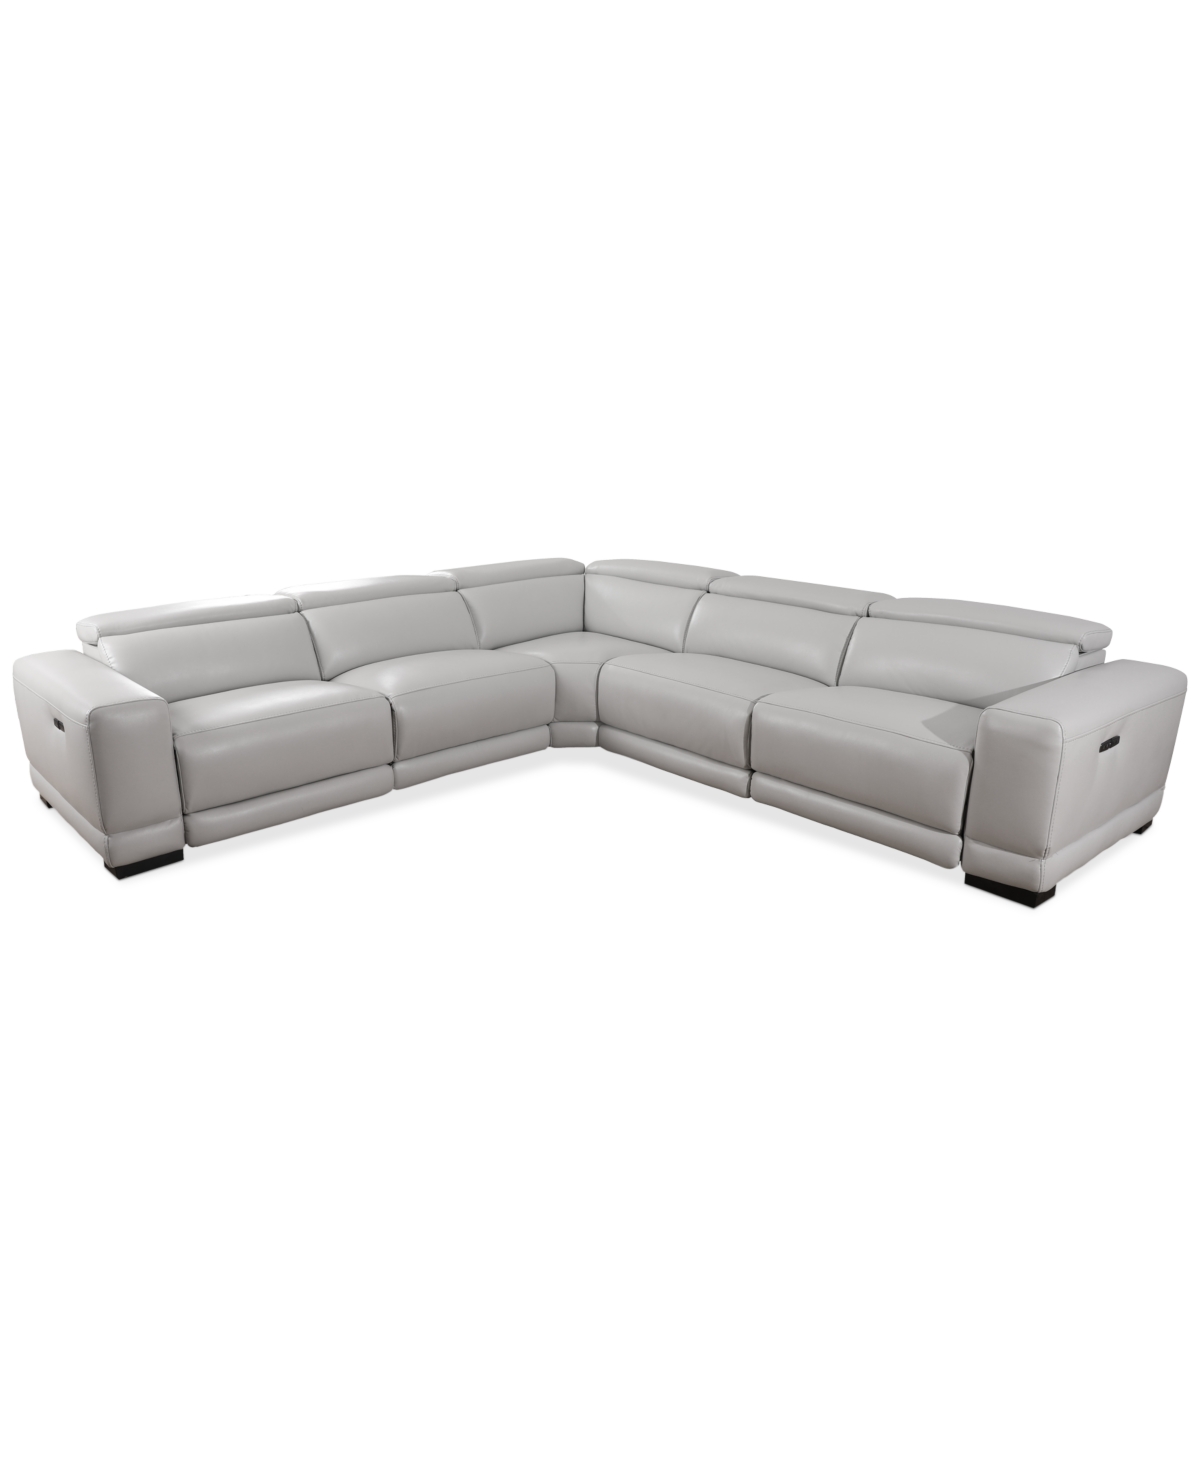 Furniture Krofton 5-pc. Beyond Leather Fabric Sectional With 3 Power Motion Recliners, Created For Macy's In Fog